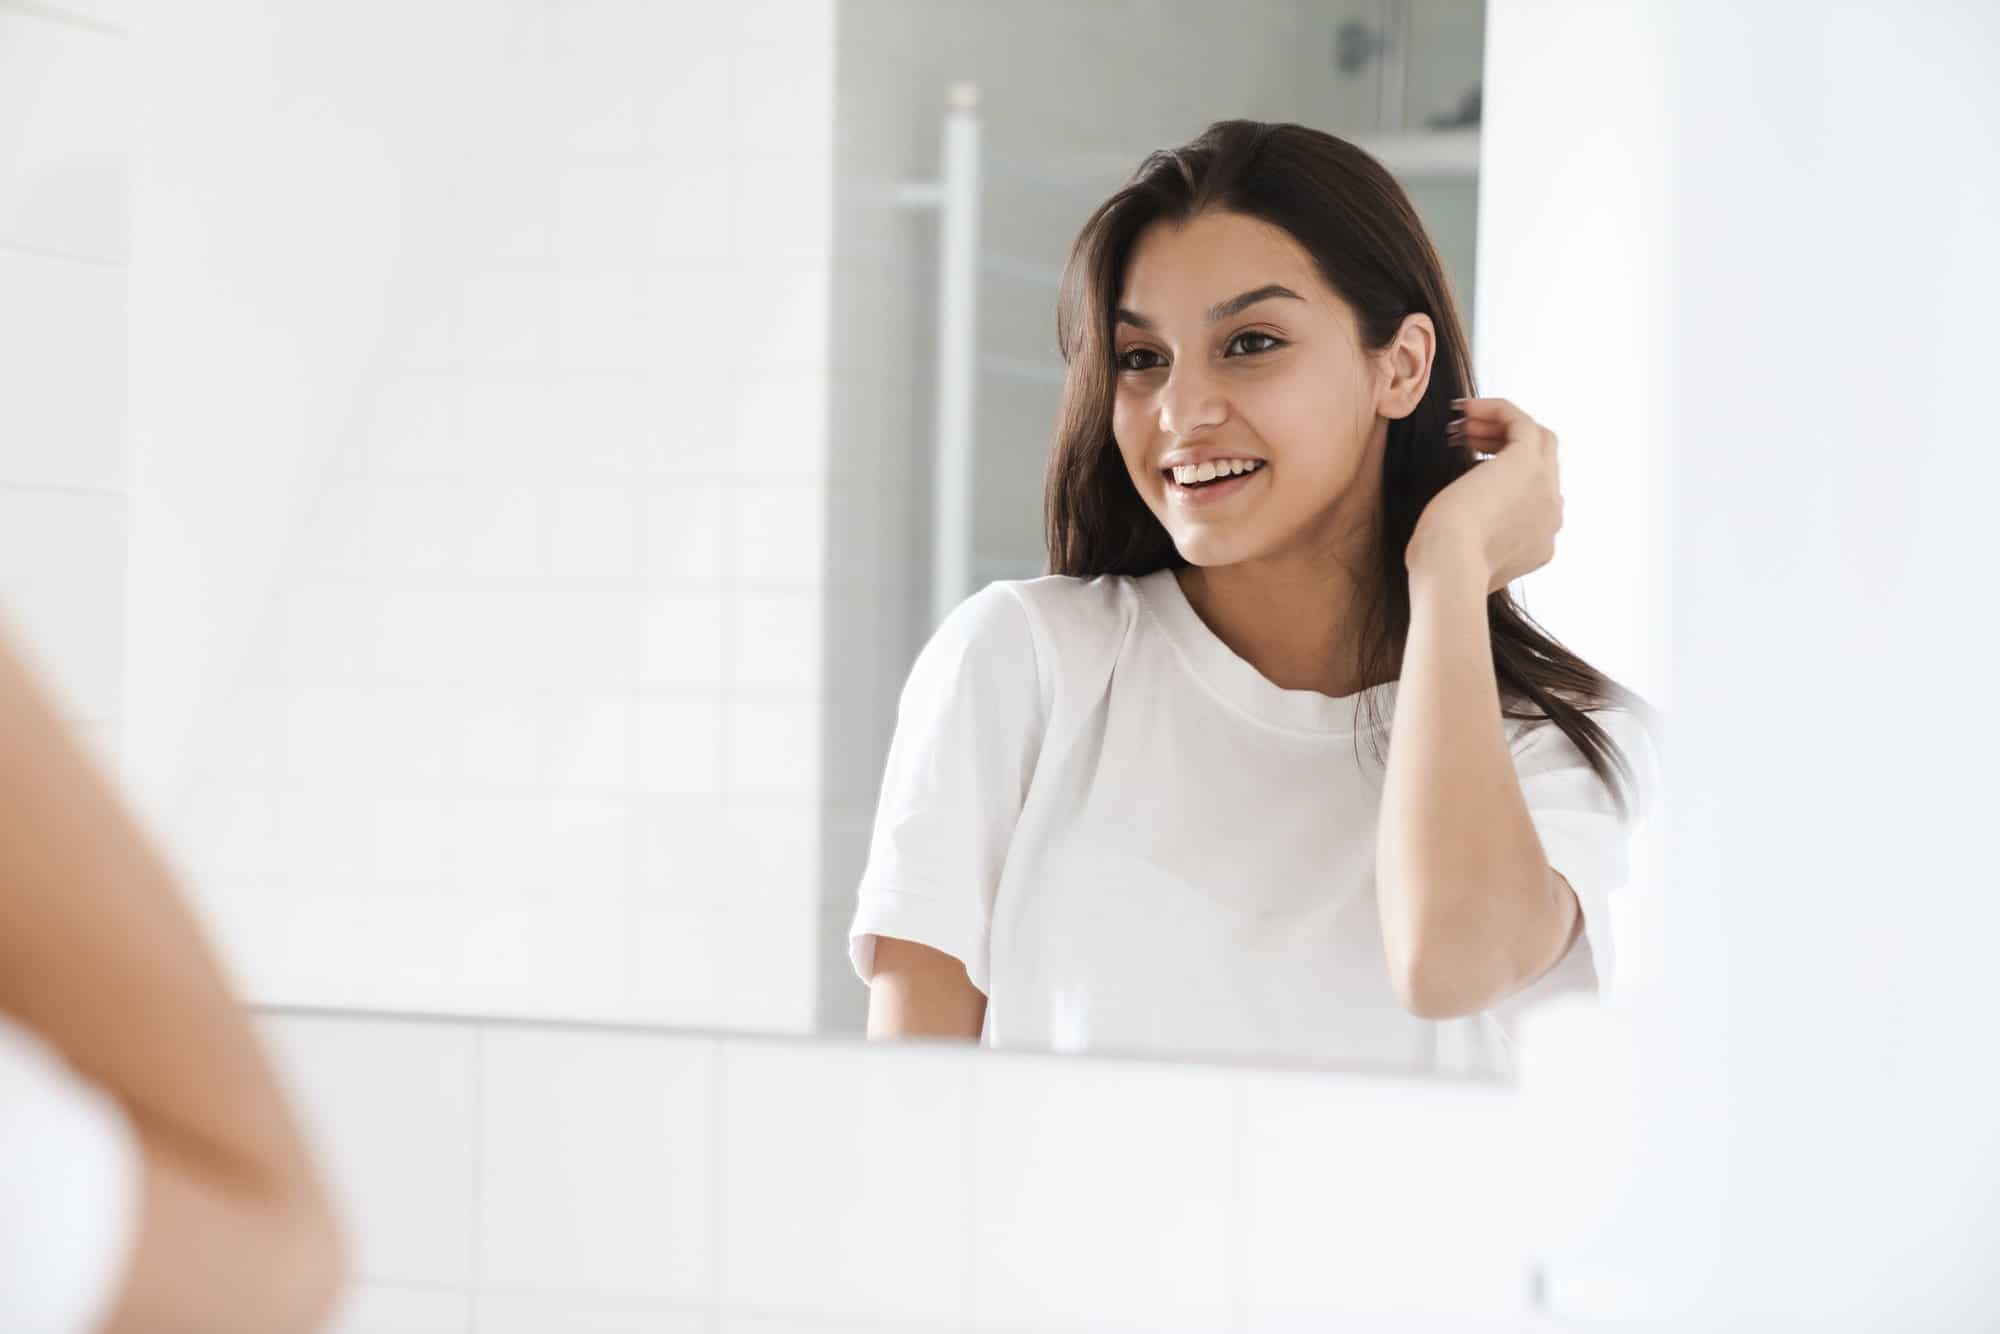 Photo of cheerful nice woman smiling while looking at mirror